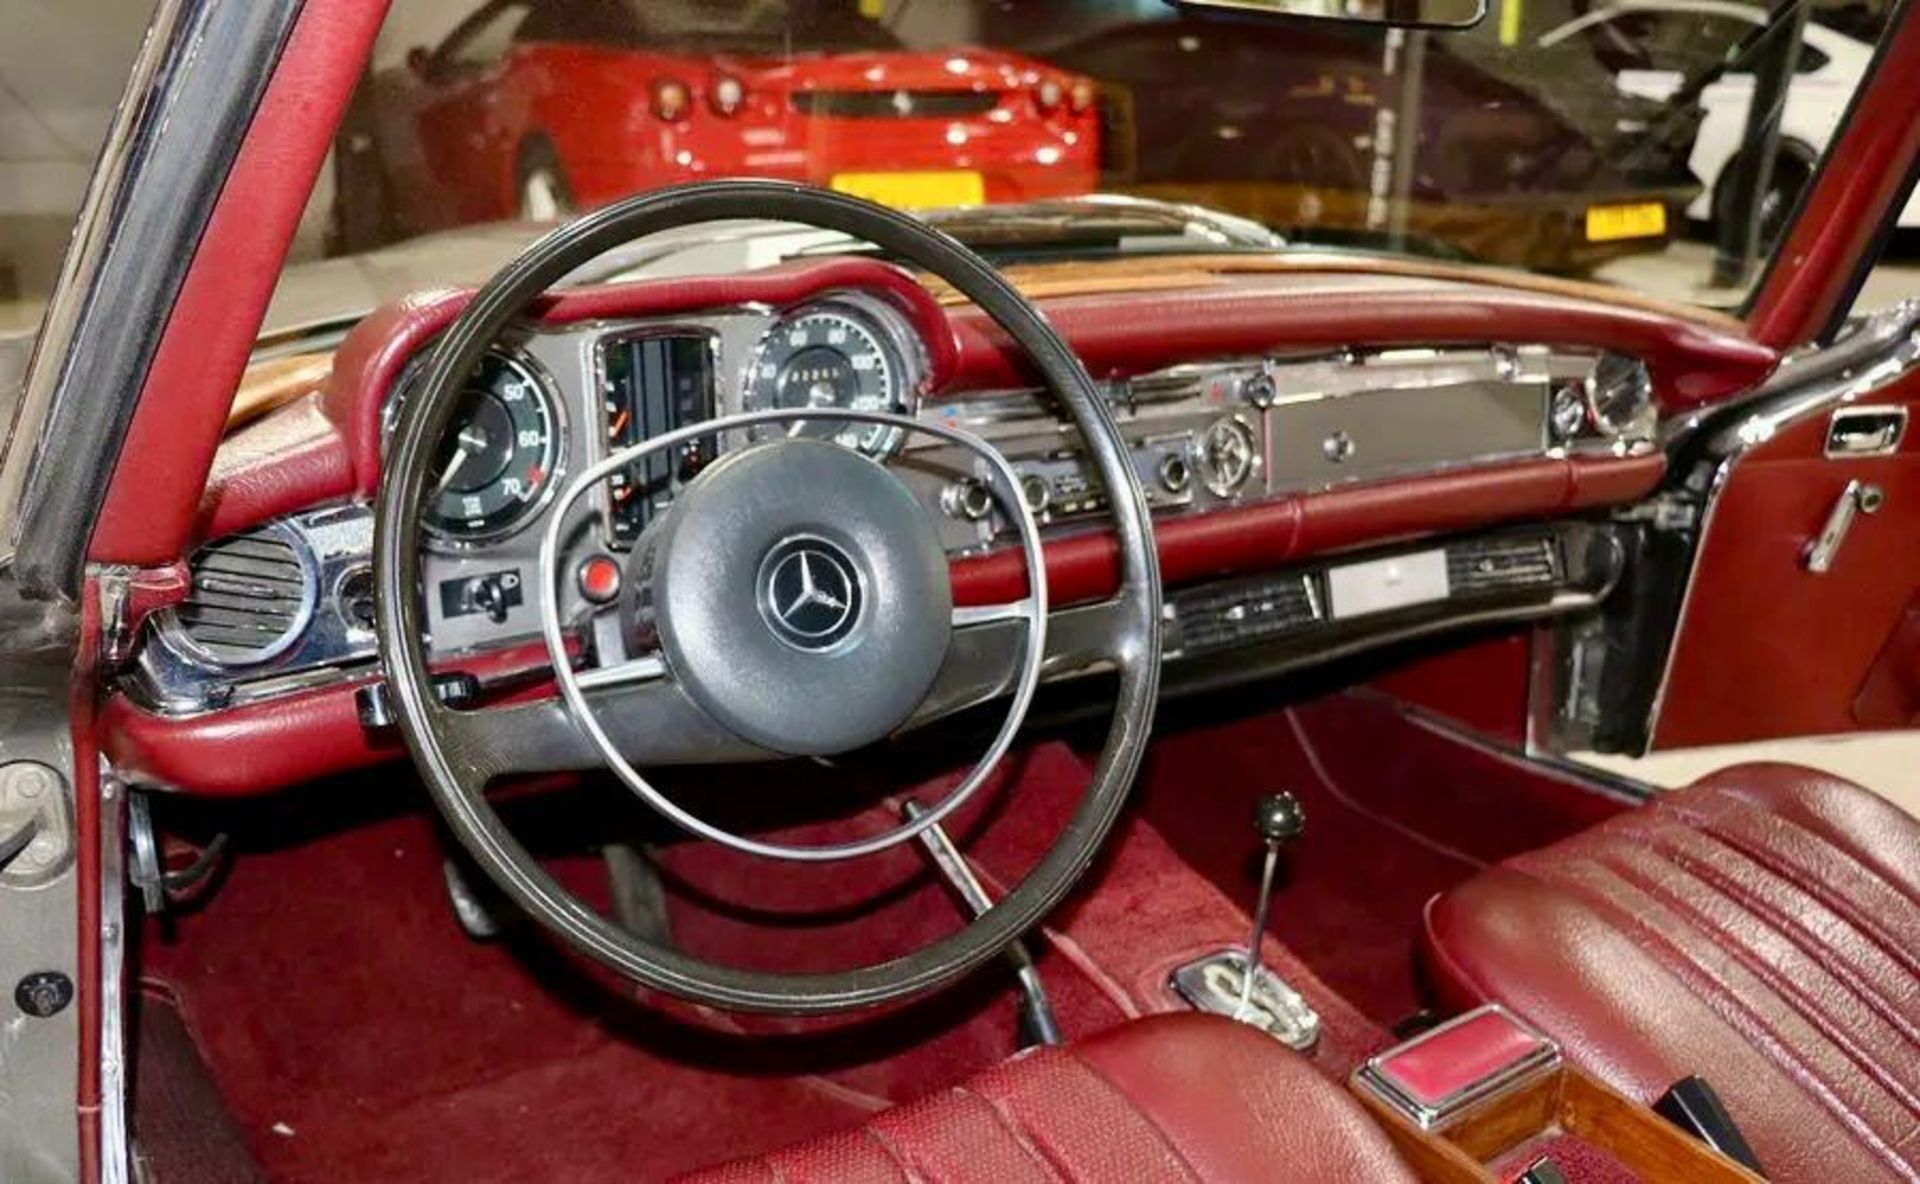 1969 MERCEDES-BENZ 280 SL, LHD MADE IN GERMANY, REGISTERED AND RESTORED IN DUBAI, CAR NOW IN THE UK - Image 12 of 15